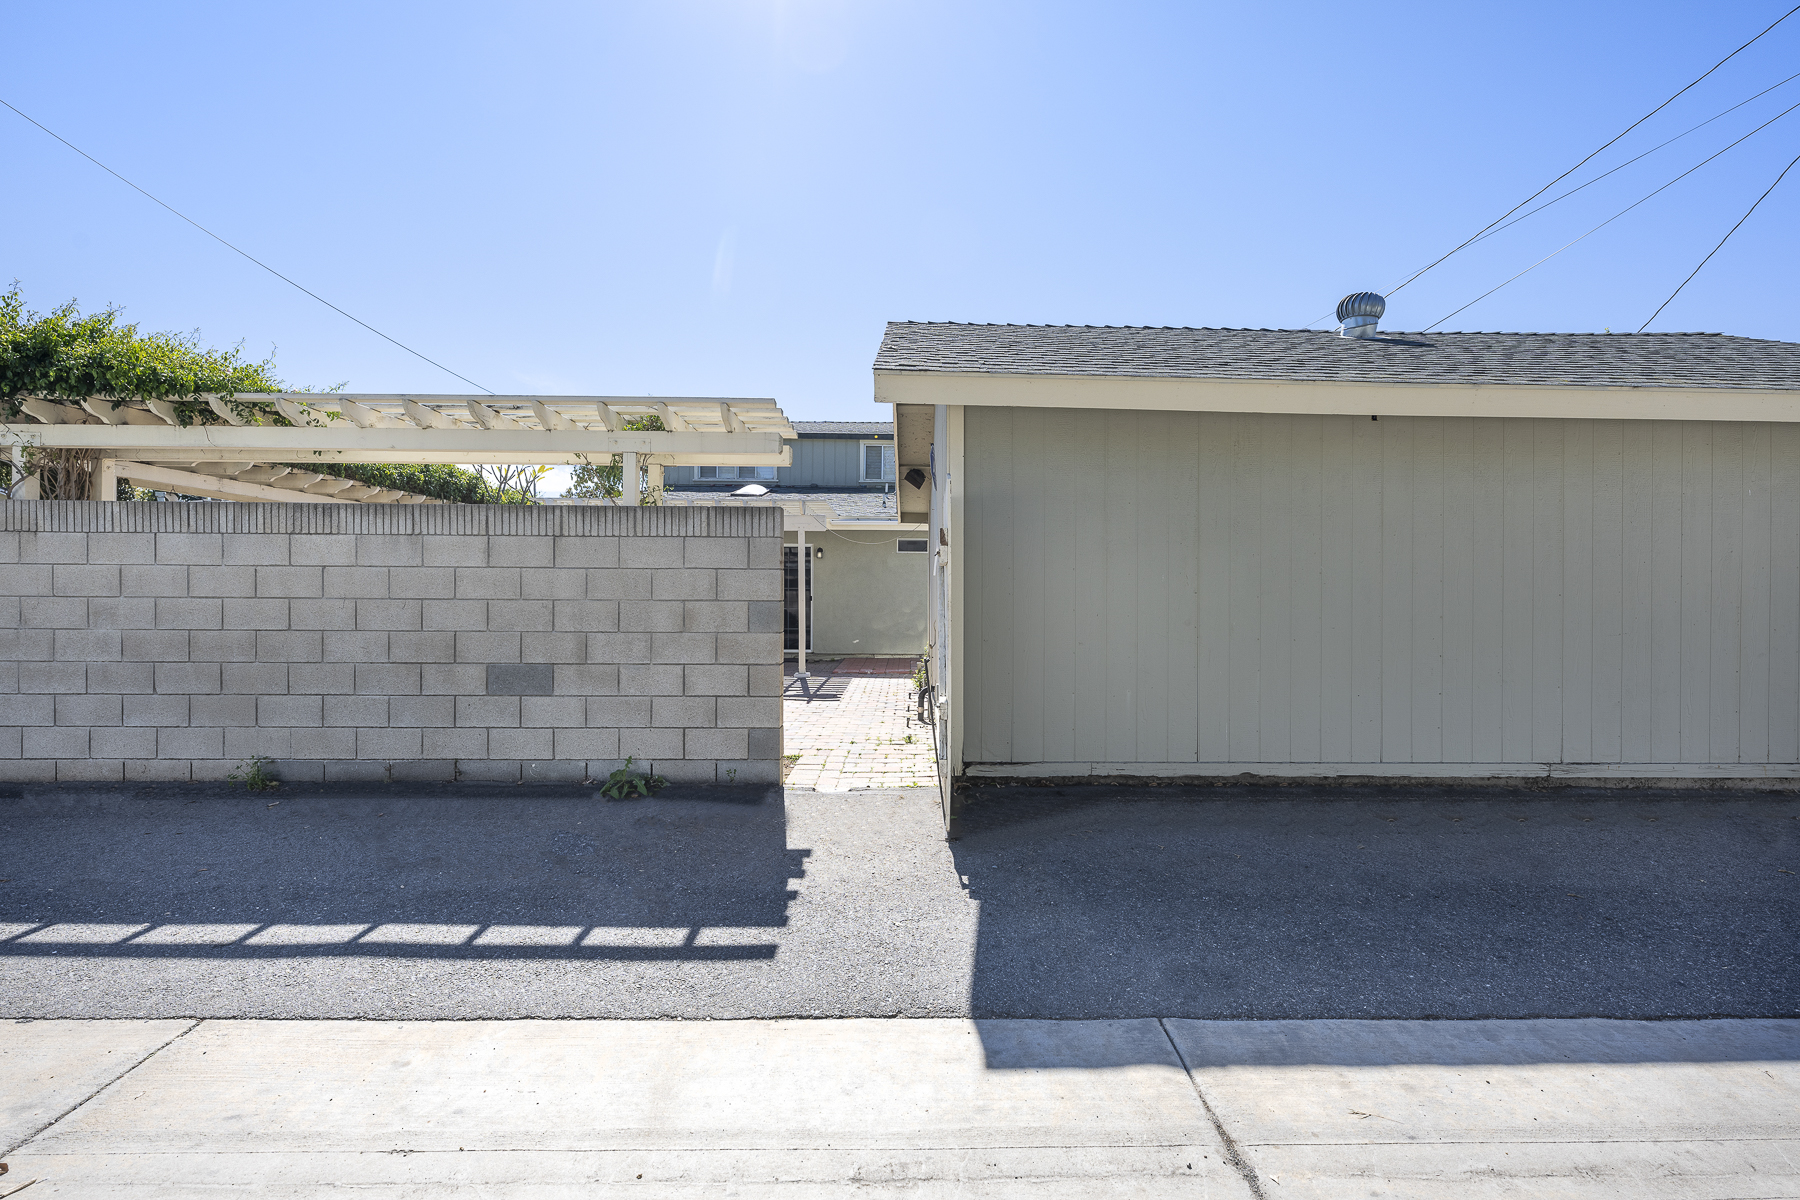 1229 Grove Place Fullerton CA 92831: Back of property from alley with gate open